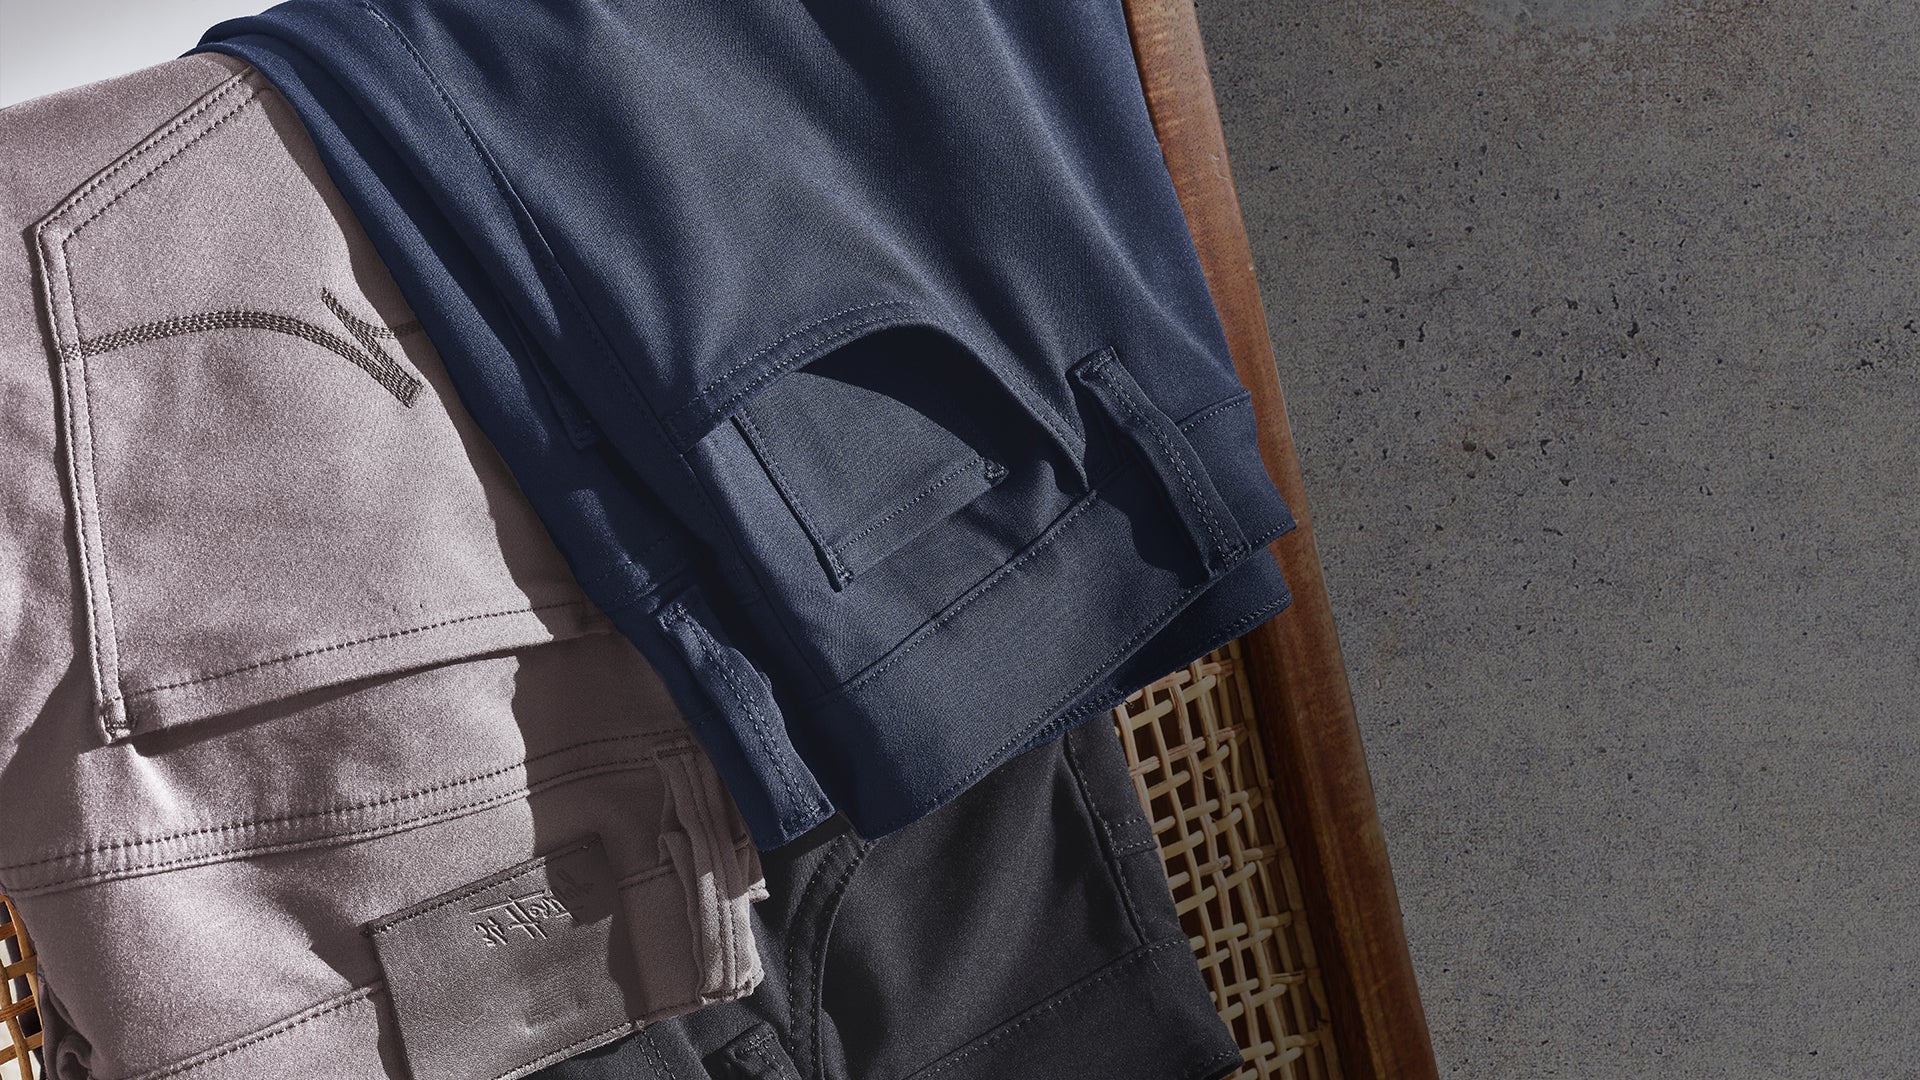 Three Reasons These are the Best Travel Pants for Men